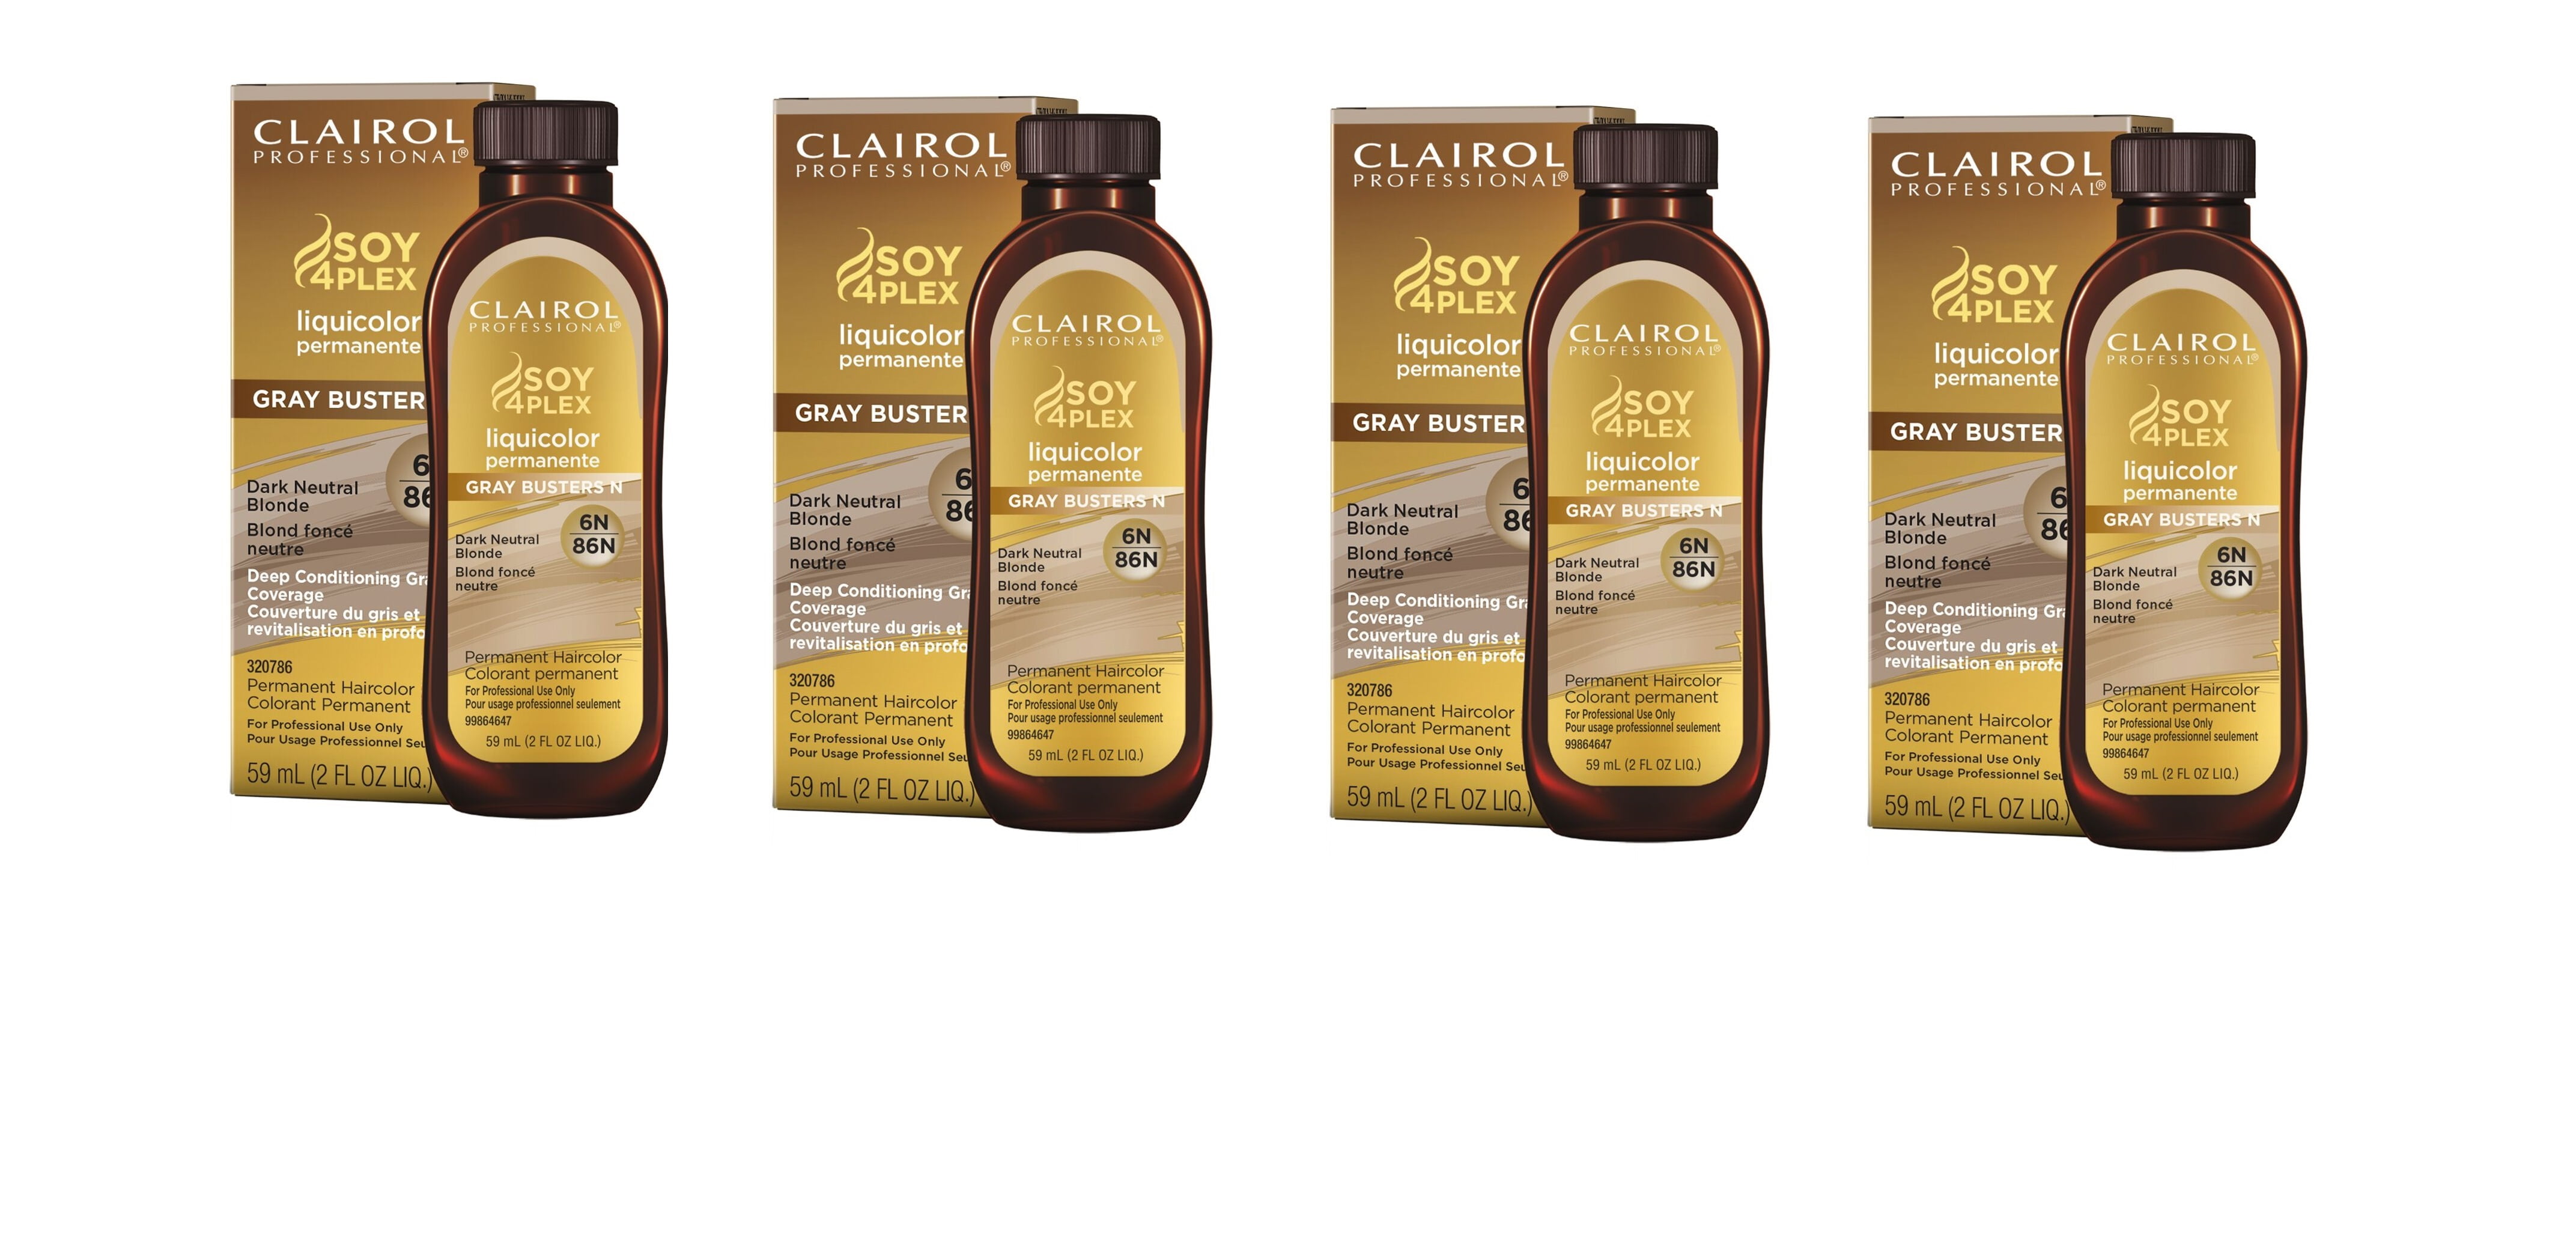 8. Clairol Professional Soy4Plex Liquicolor Permanent Hair Color, 9AA/20D Very Light Ultra Cool Blonde - wide 6